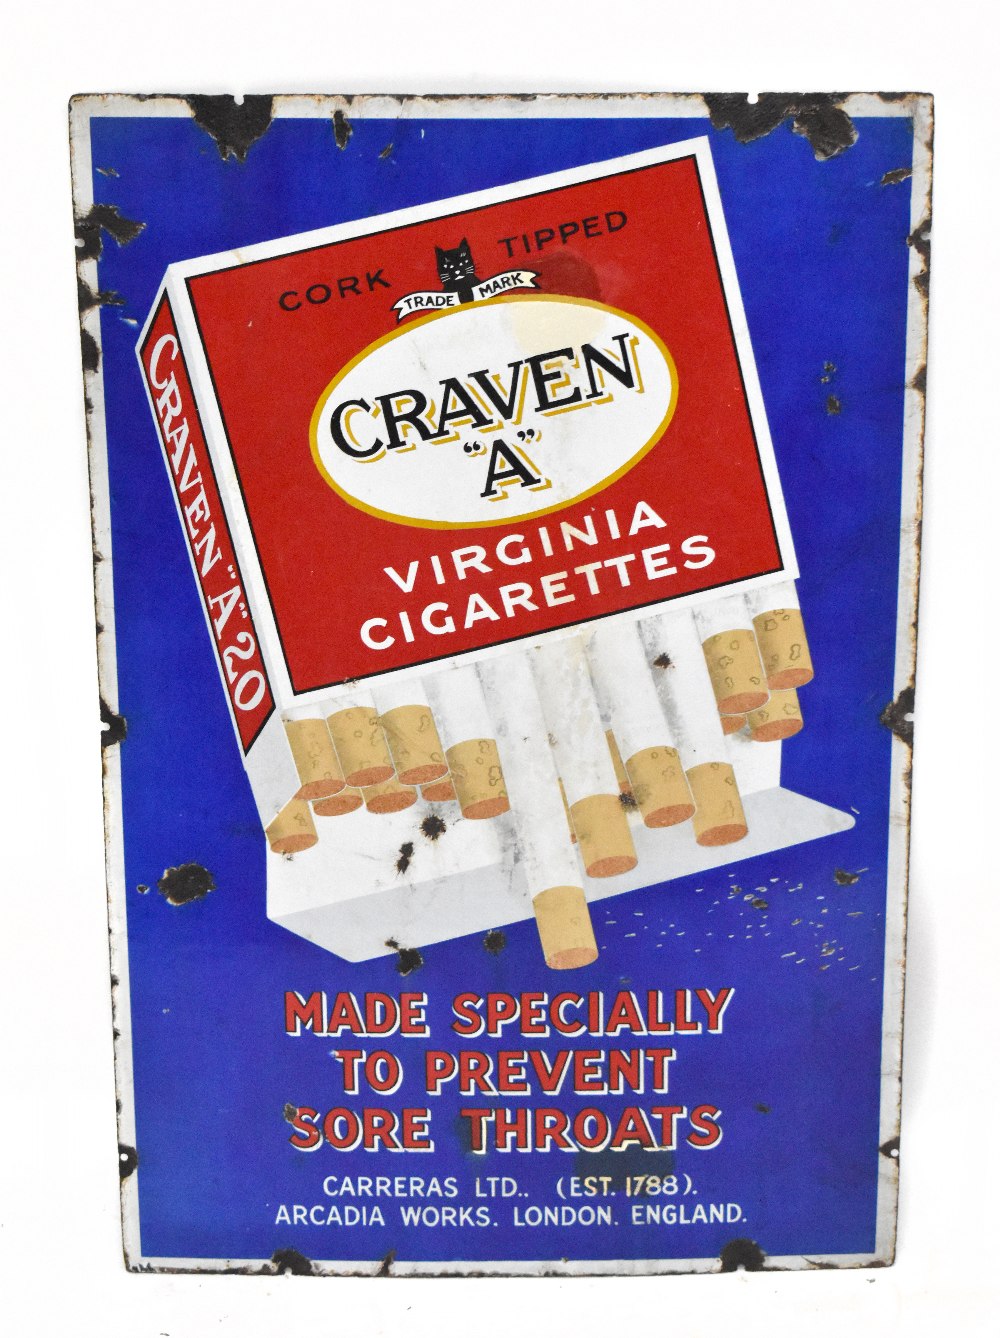 An original advertising enamelled sign 'Craven A, corked tipped Virginia cigarettes, made 'specially